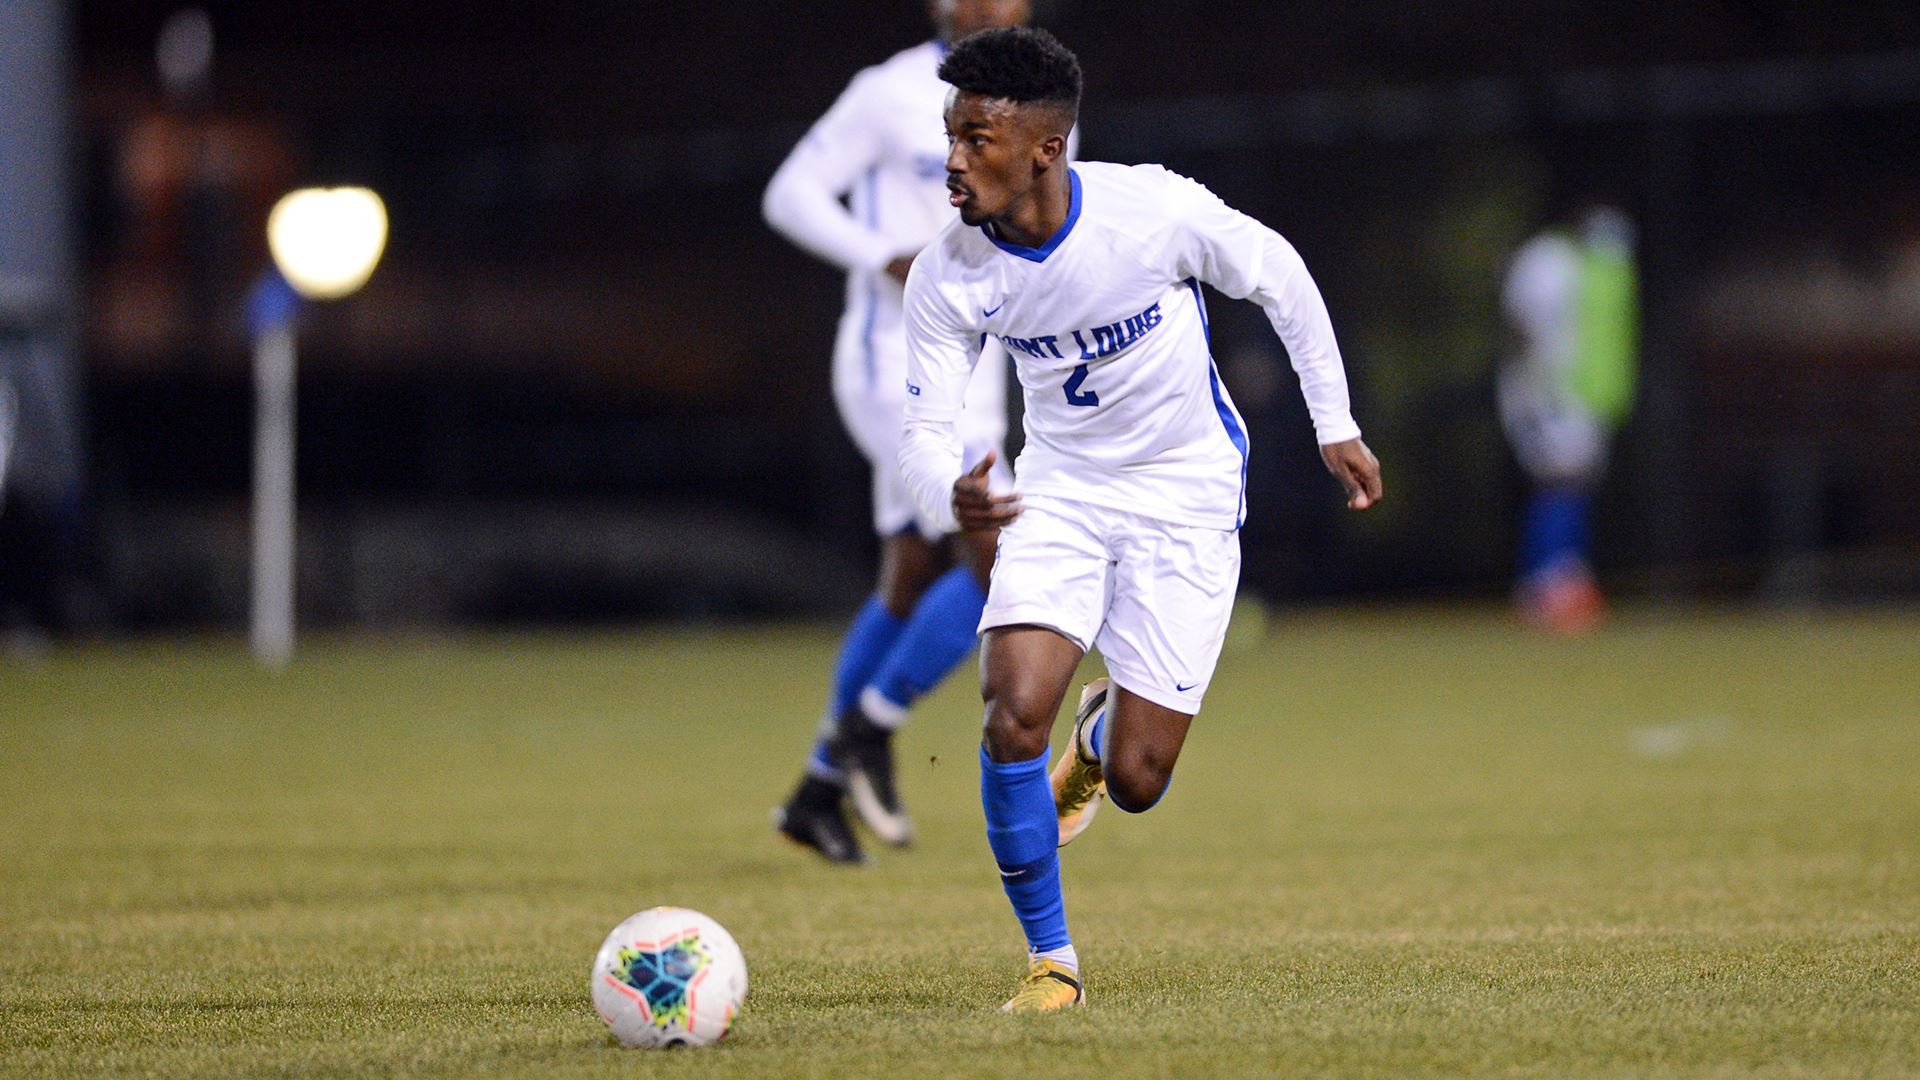 MLS Academy players to know in college